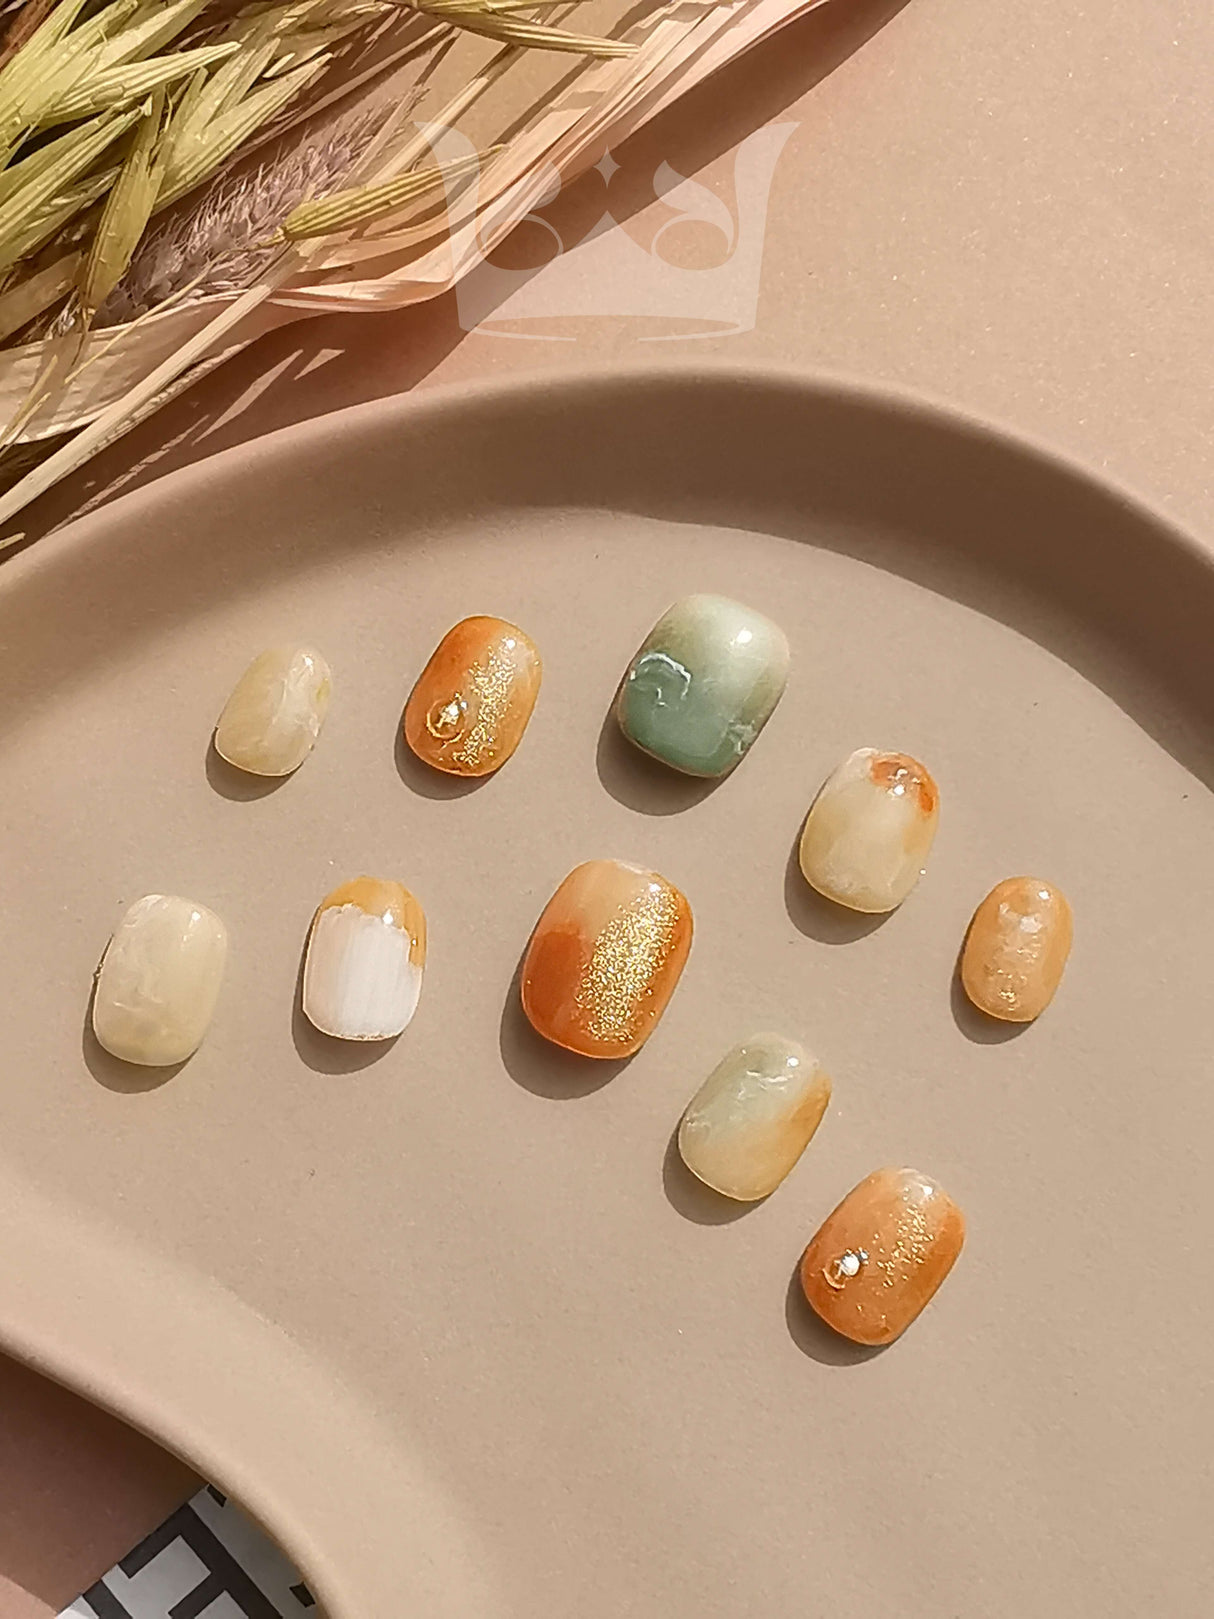 These oval-shaped acrylic nails with a natural stone effect and earthy tones are for a bohemian aesthetic. They have a shimmering finish for a touch of glamour.